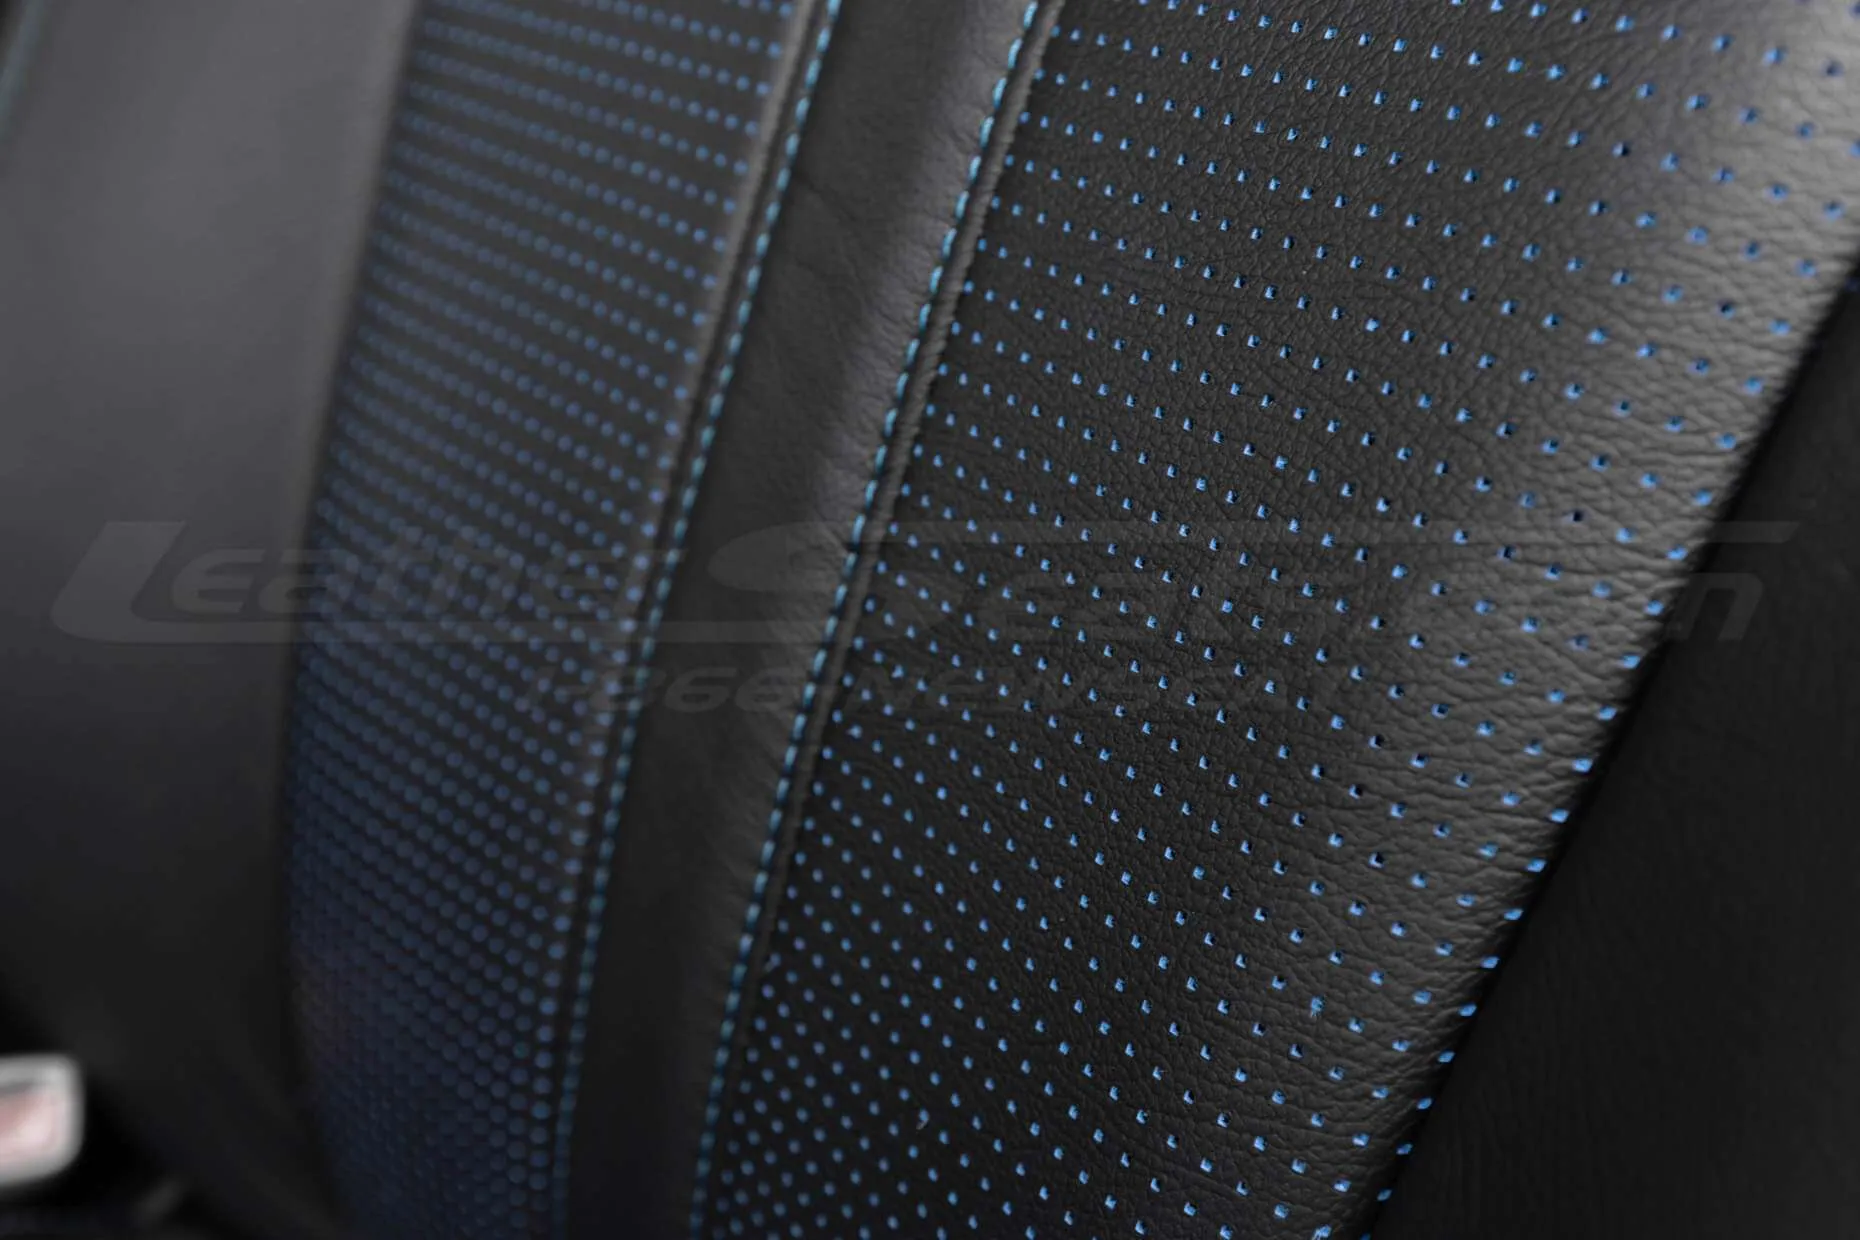 Piazza BLue Perforation close-up